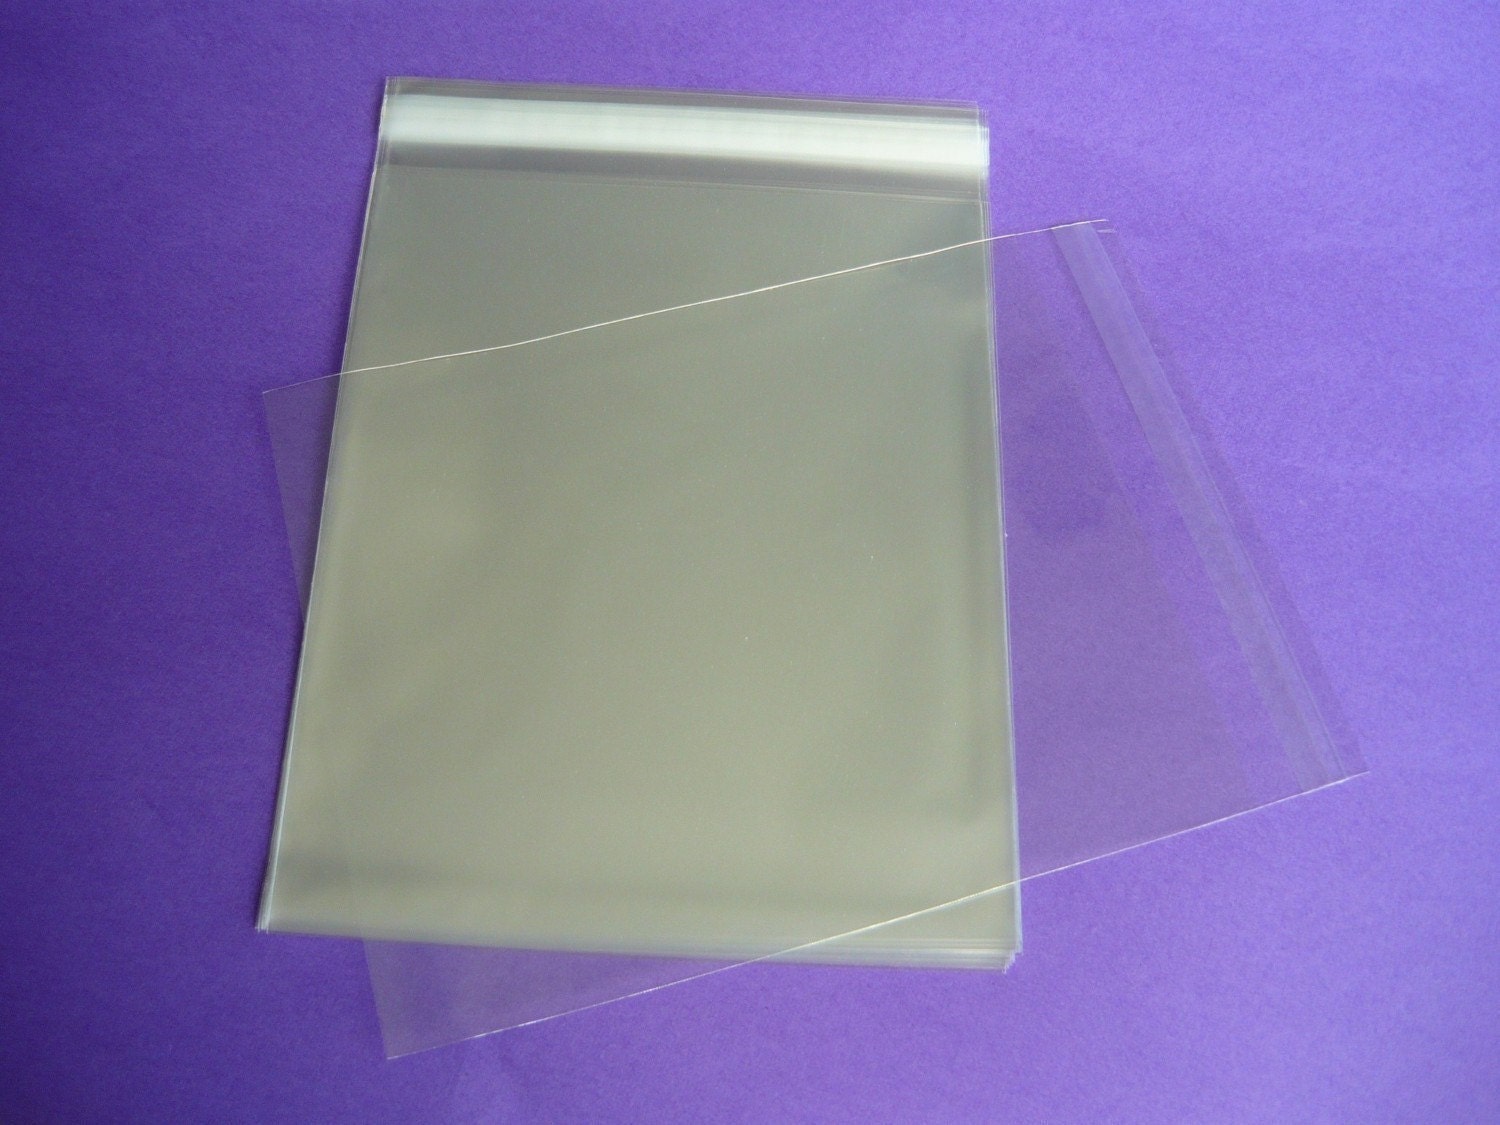 Clear Greeting Card Bags and Notecard Sleeves, Packs of 100 Pieces